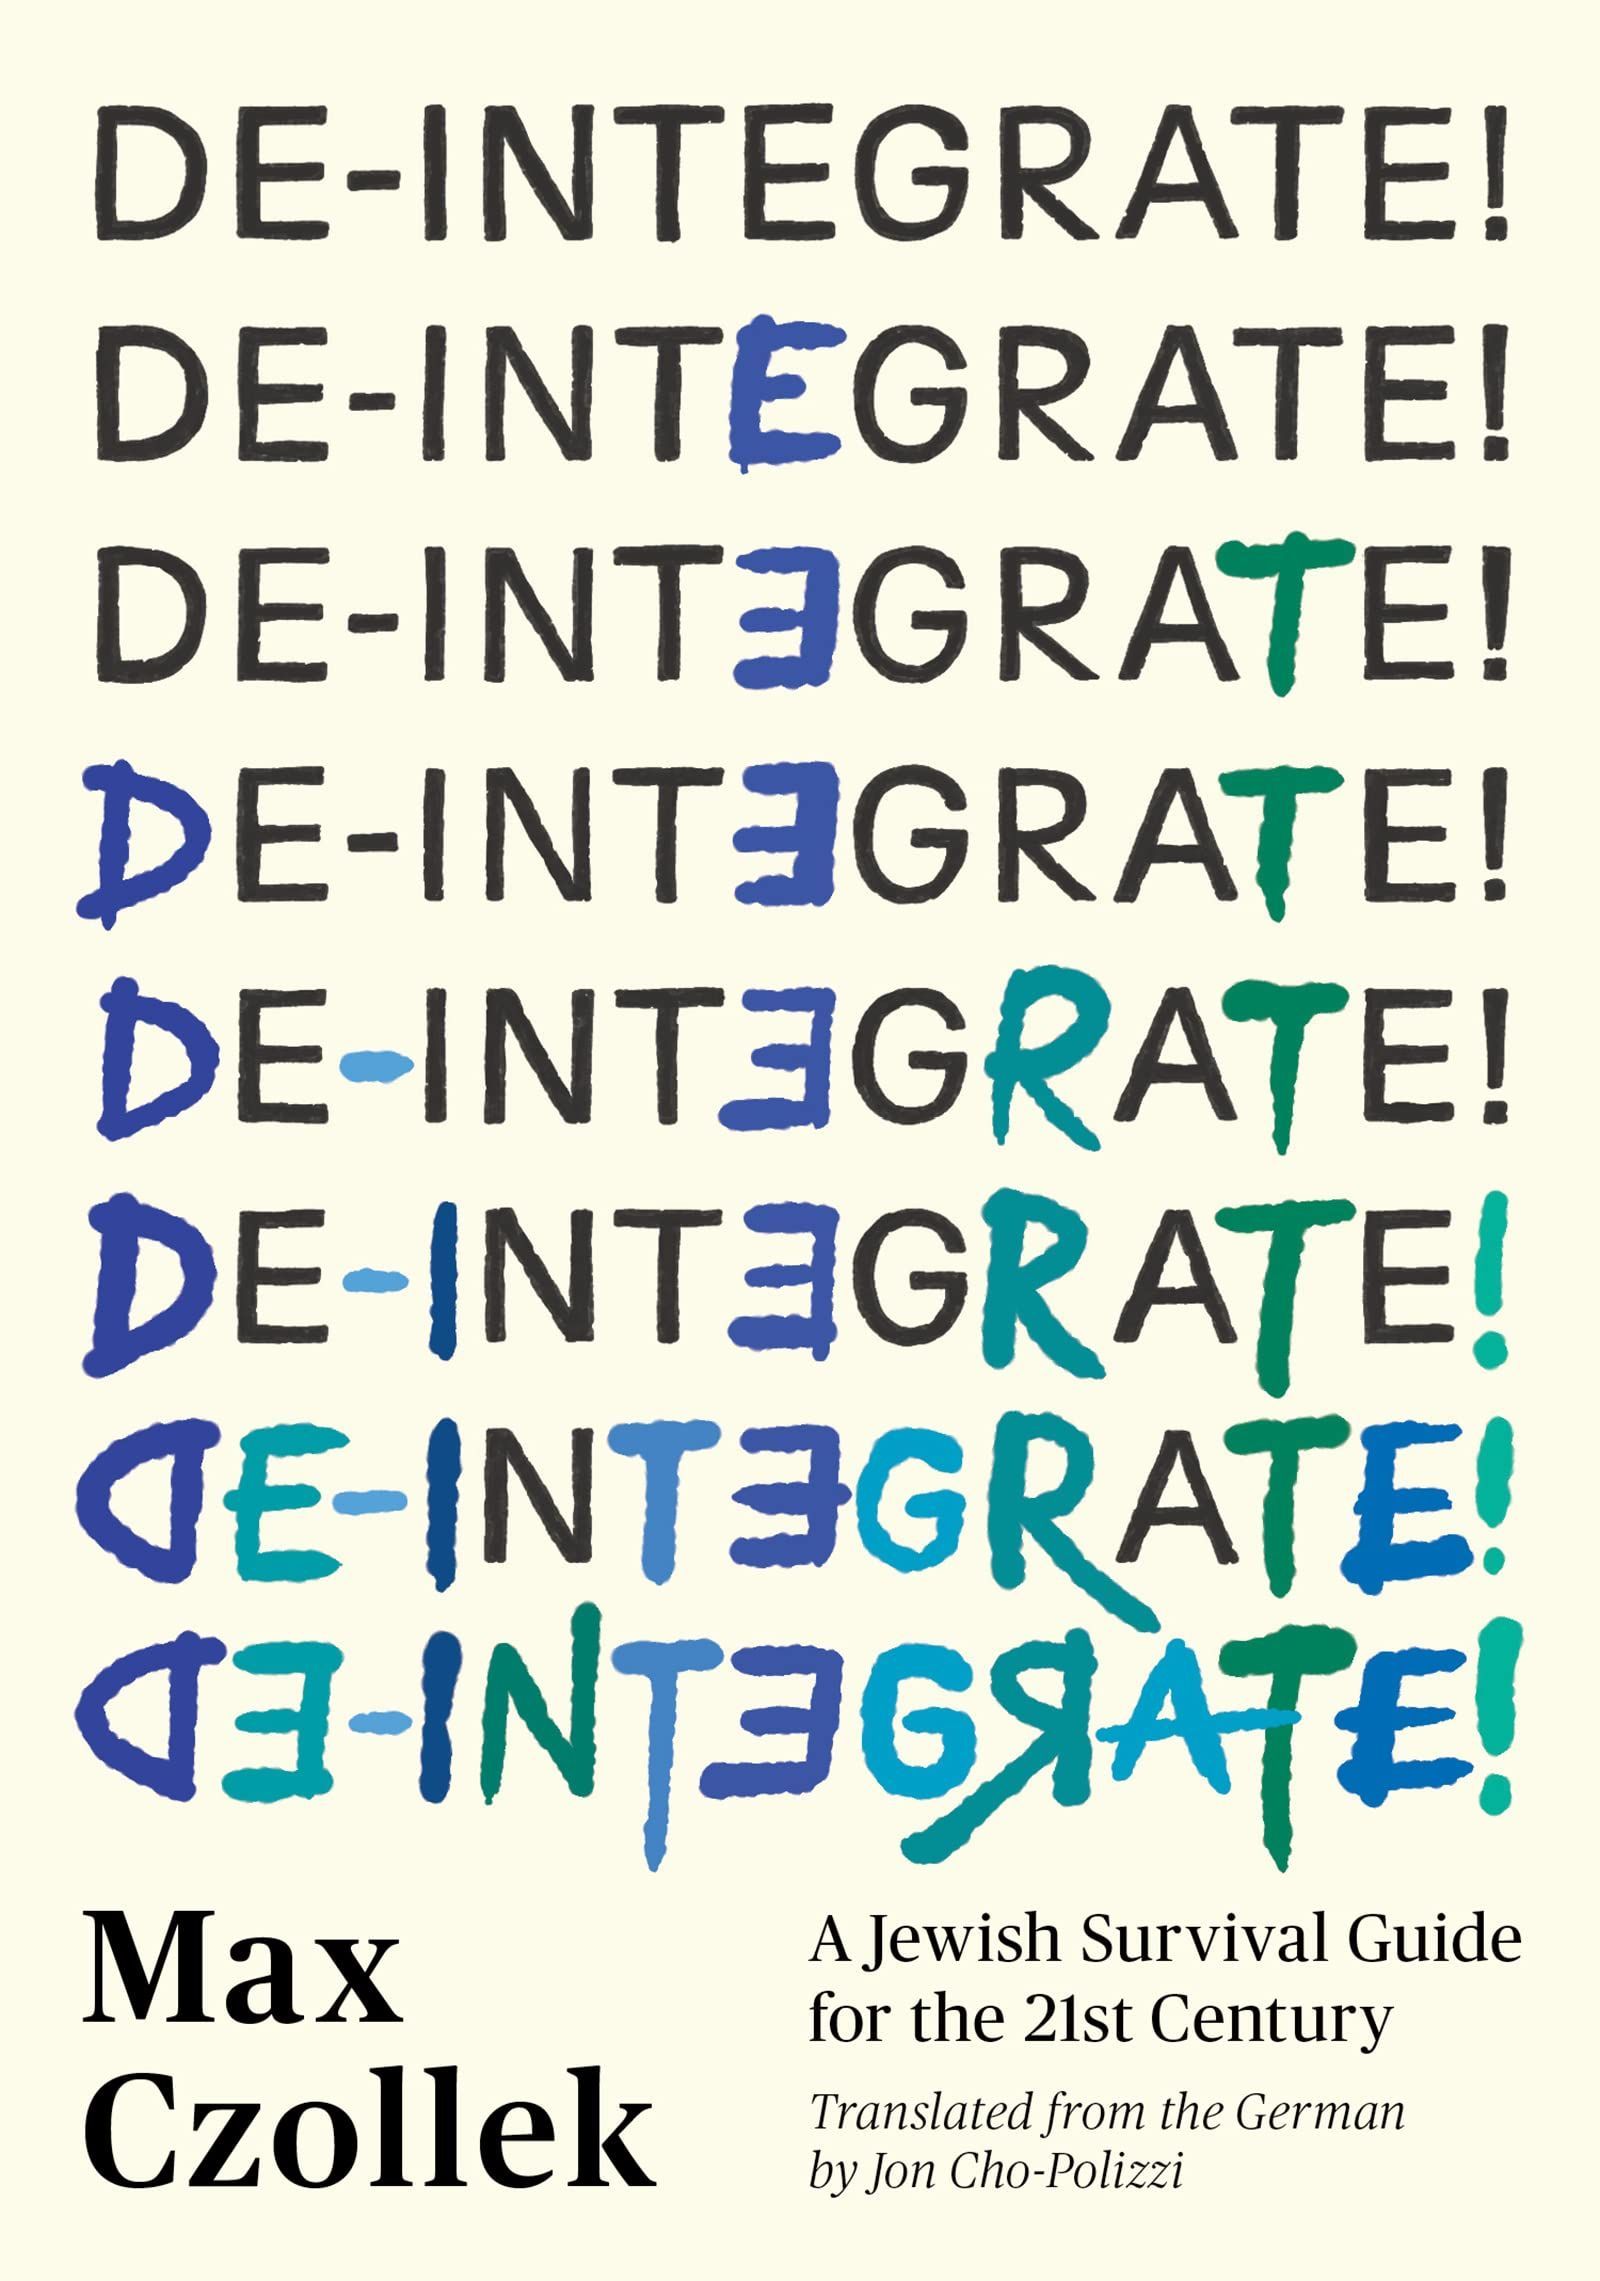 An Act of Dissimilation: On Max Czollek’s “De-integrate!”